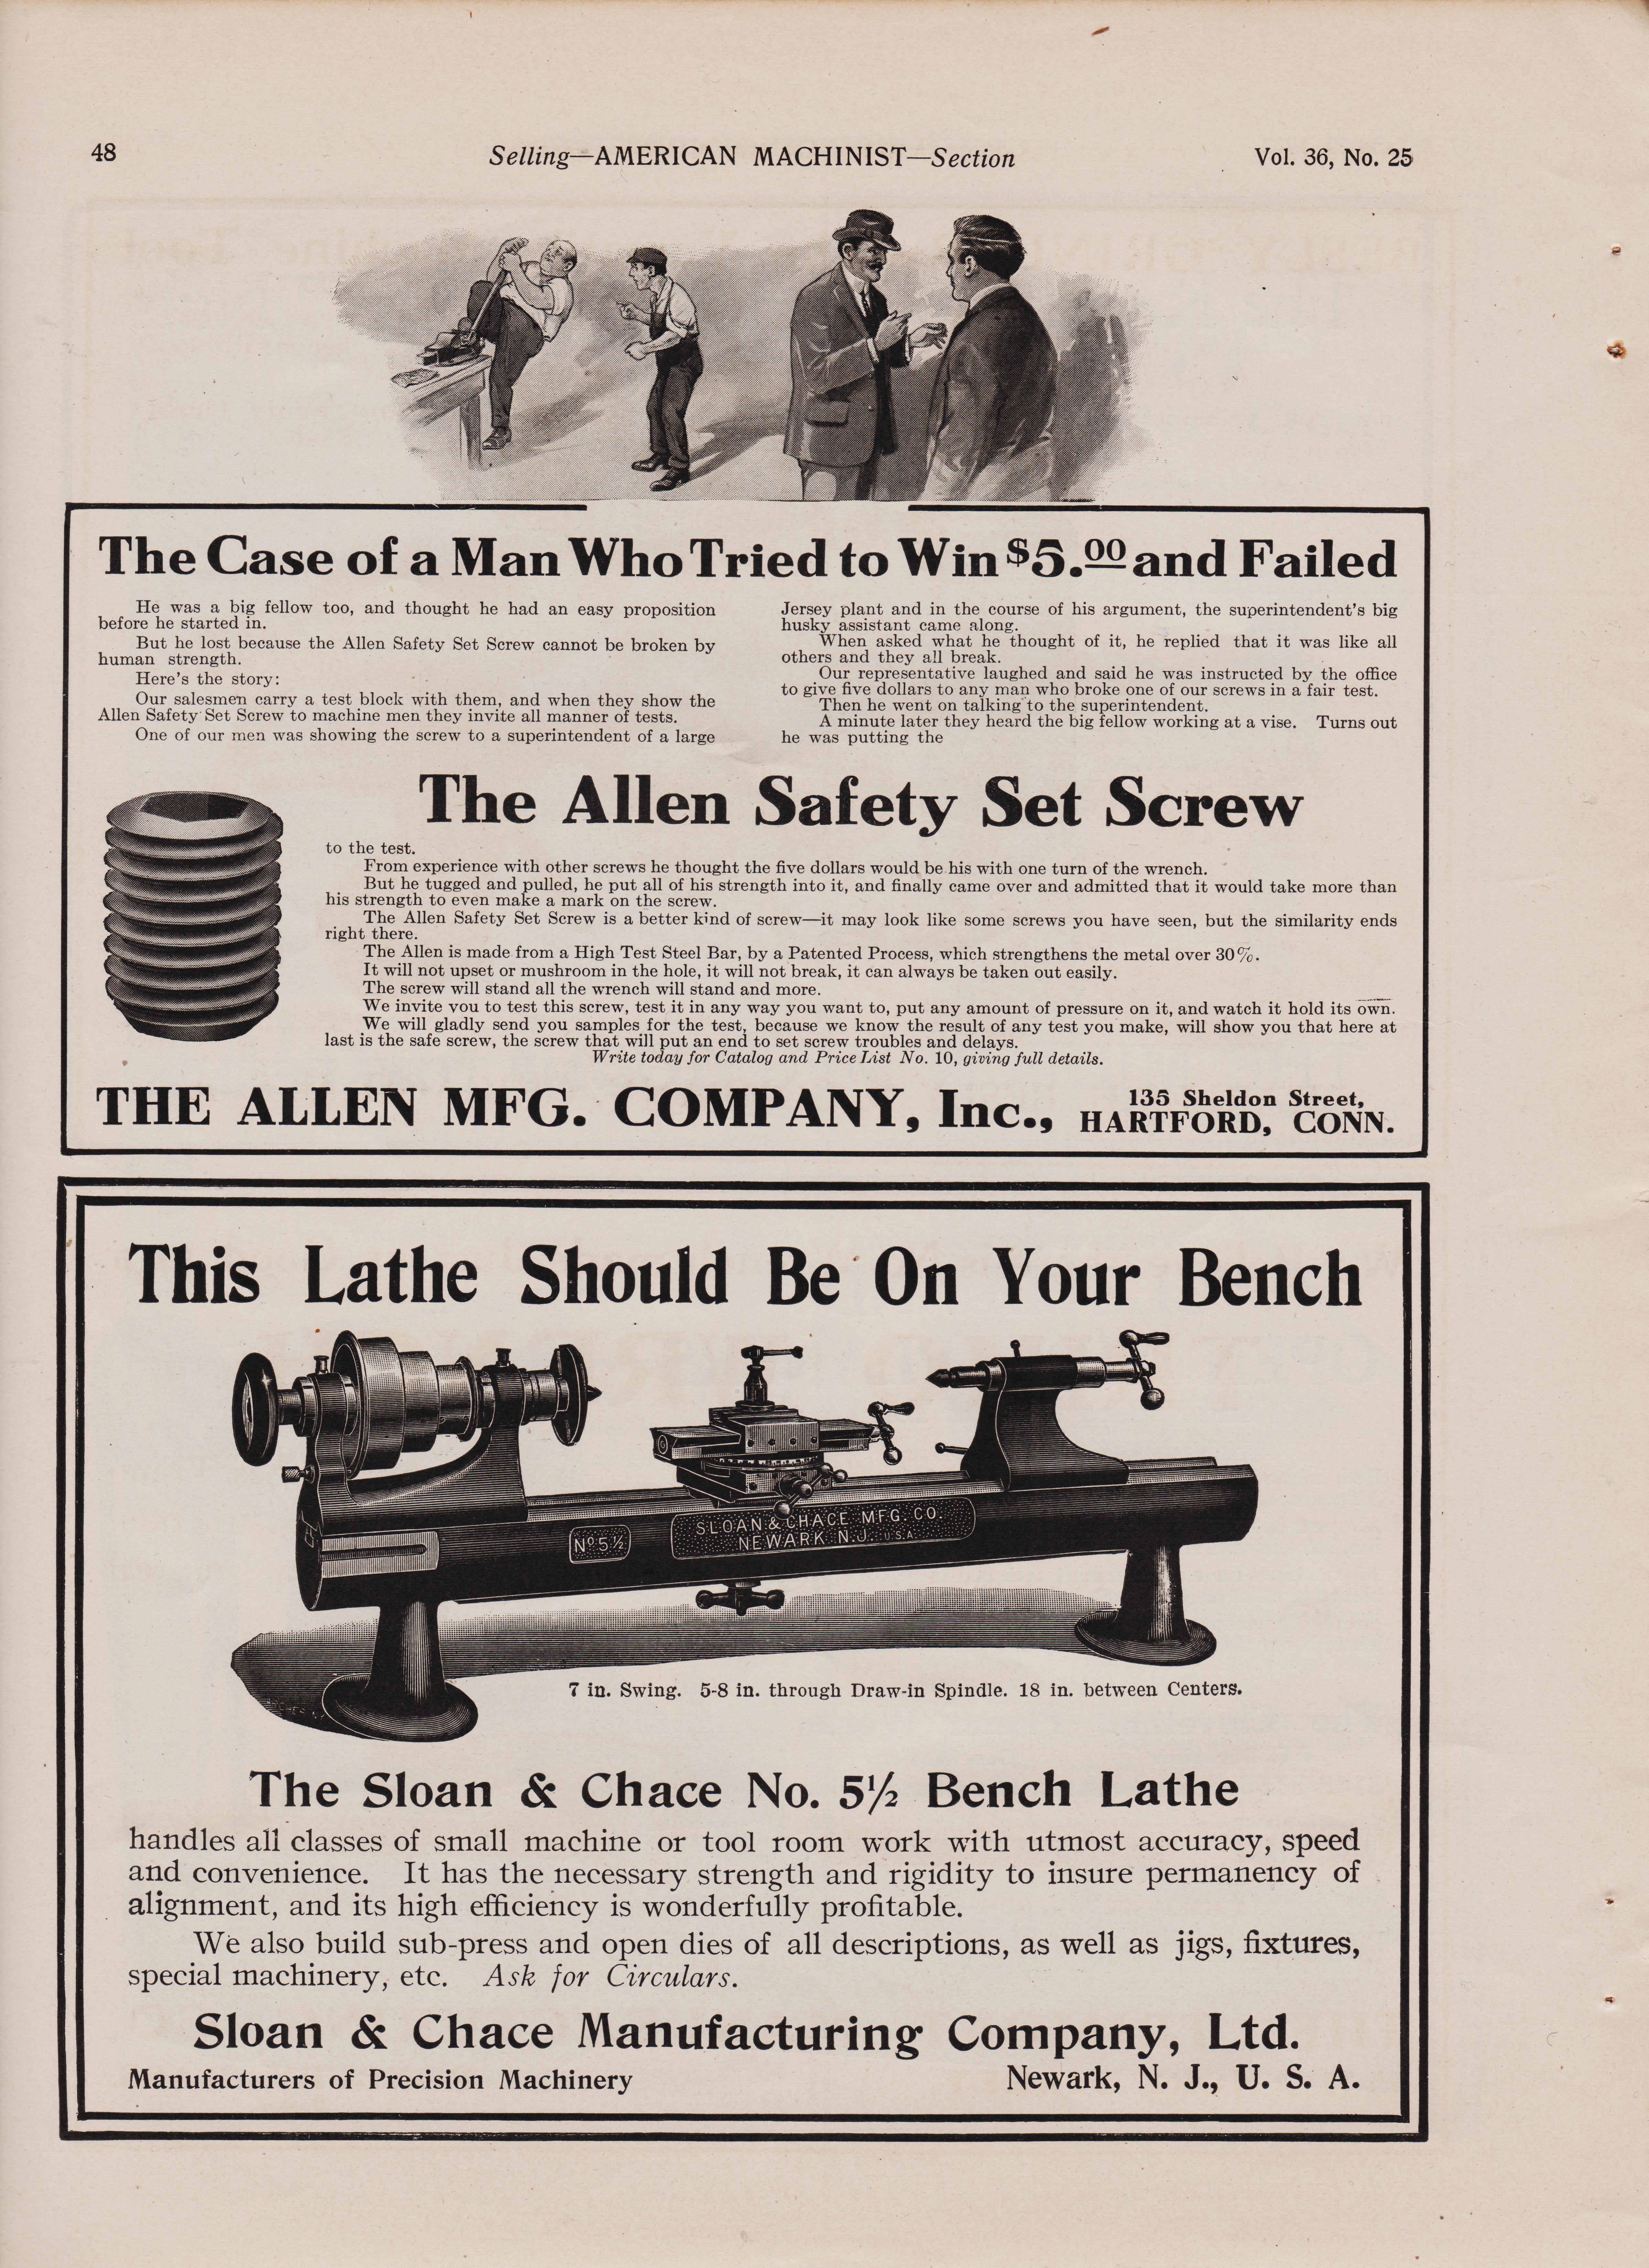 https://antiquemachinery.com/images-2021/1912-American-Machinist-Magazine-1912-June-pg-48-Allen-Screw-Mfg-Co-5-and-one-half-Sloan-and-Chance-Bench-Lathe-Manufacturing-Co-ltd.jpeg